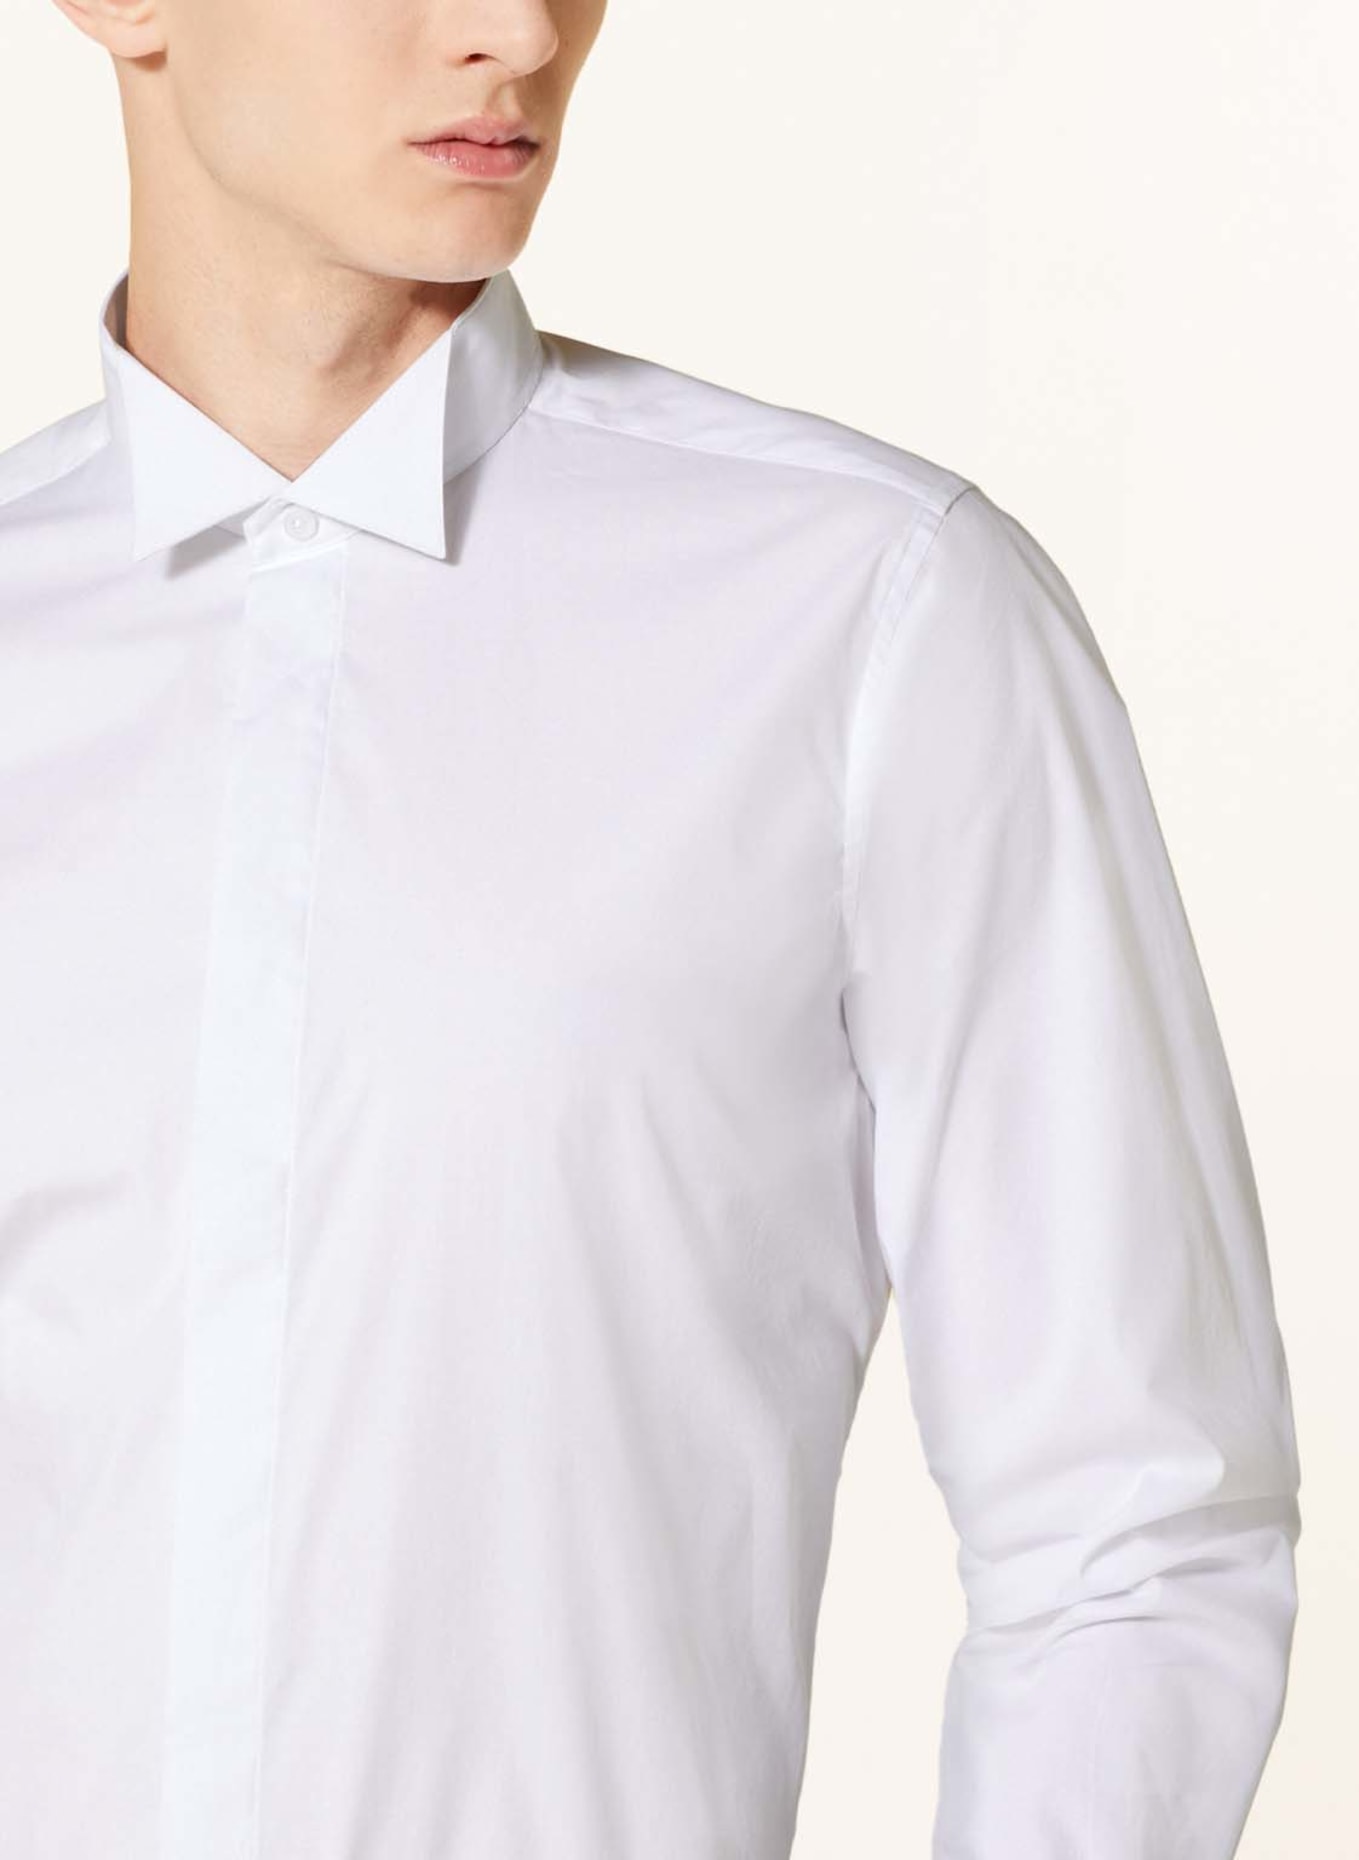 PAUL Tuxedo shirt GALA slim fit with French cuffs, Color: WHITE (Image 4)